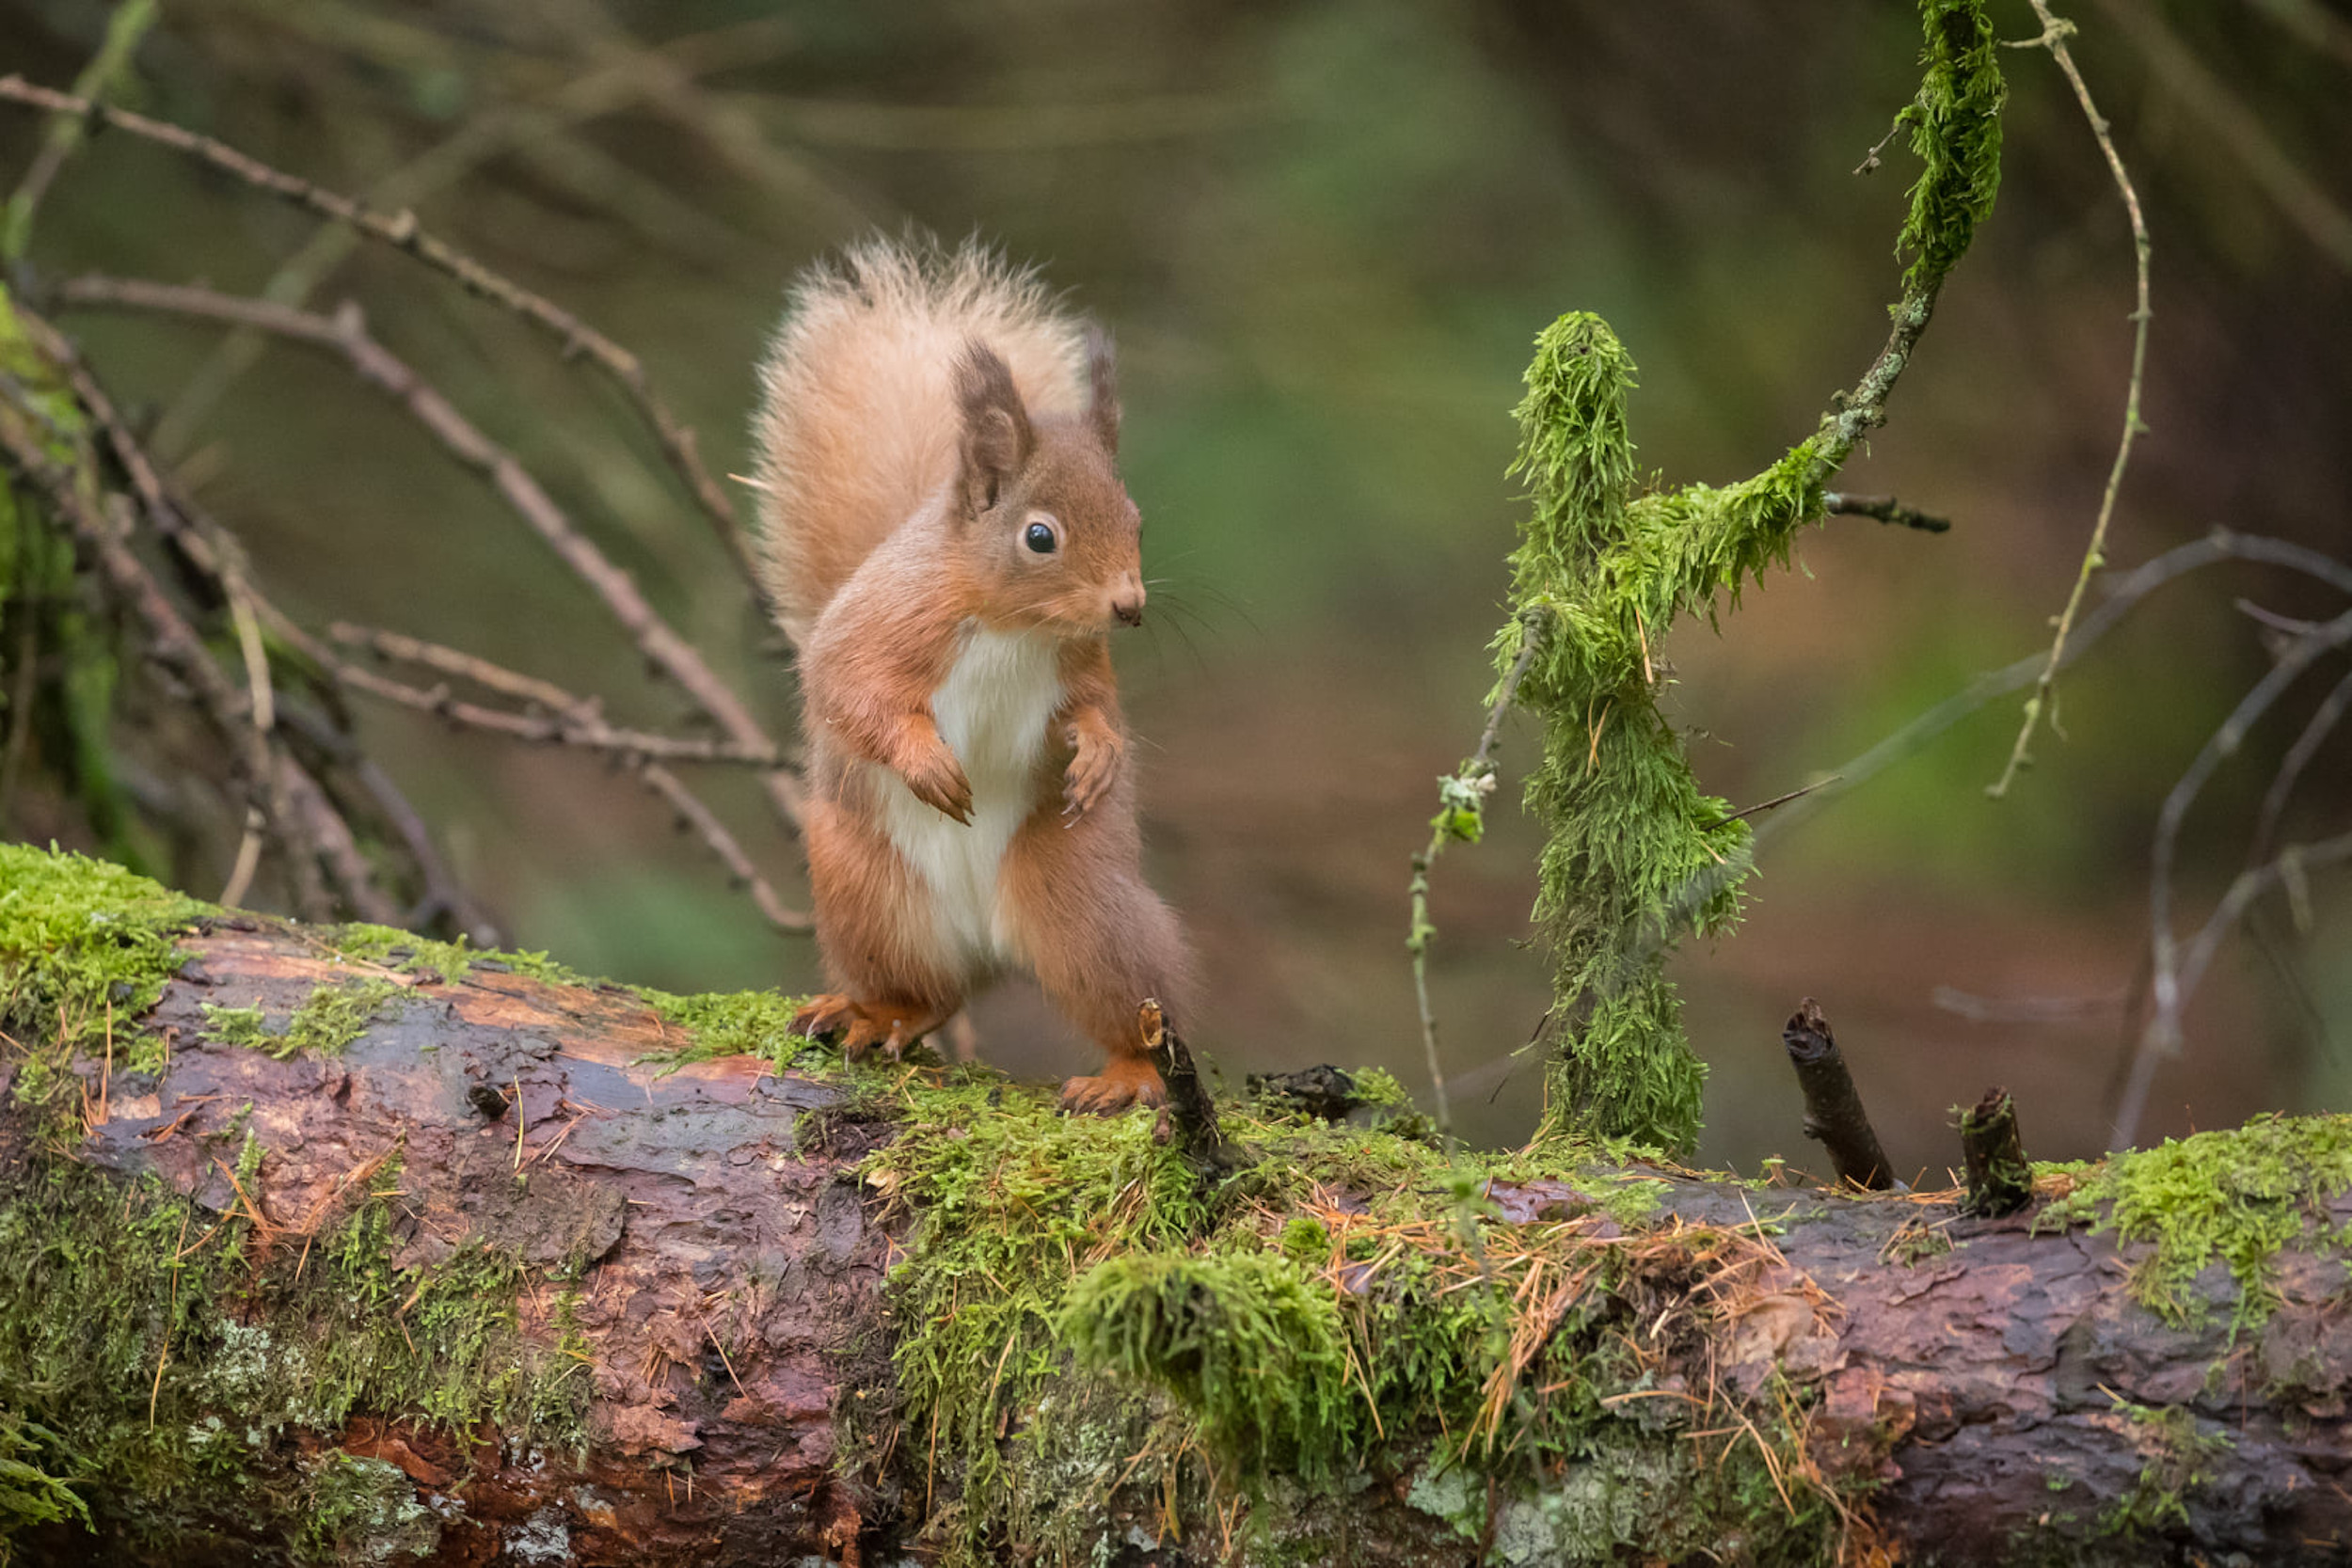 Squirrel dancing with twig - Nature News Scotland